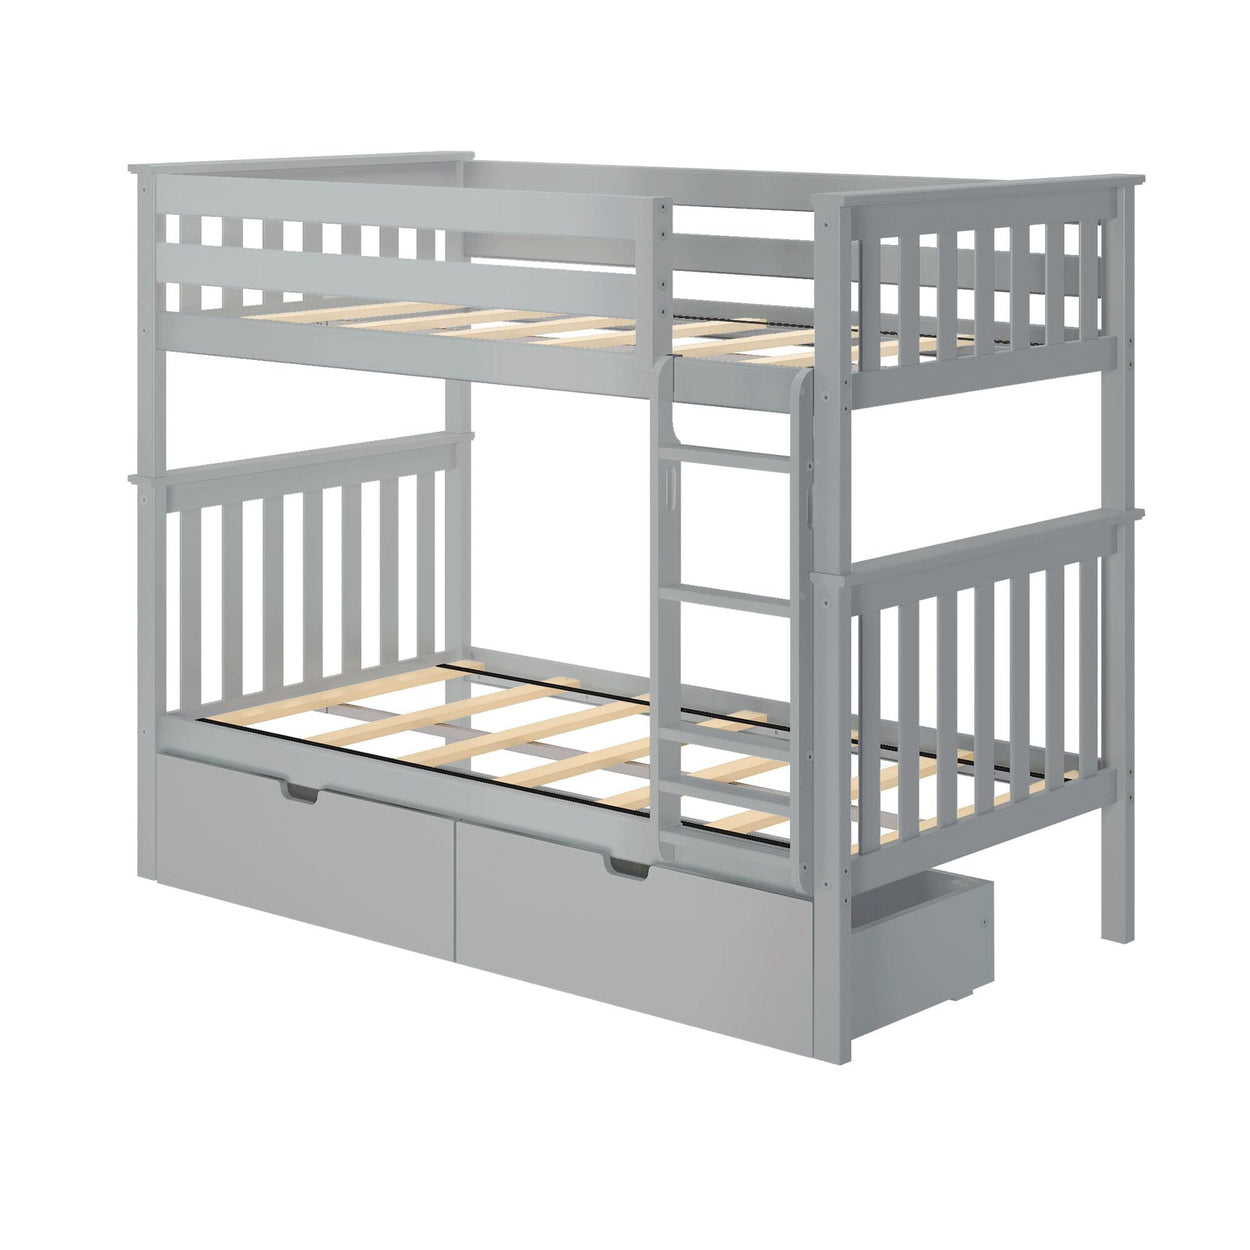 187201-121 : Bunk Beds Twin Bunk Bed With Underbed Storage Drawers, Grey